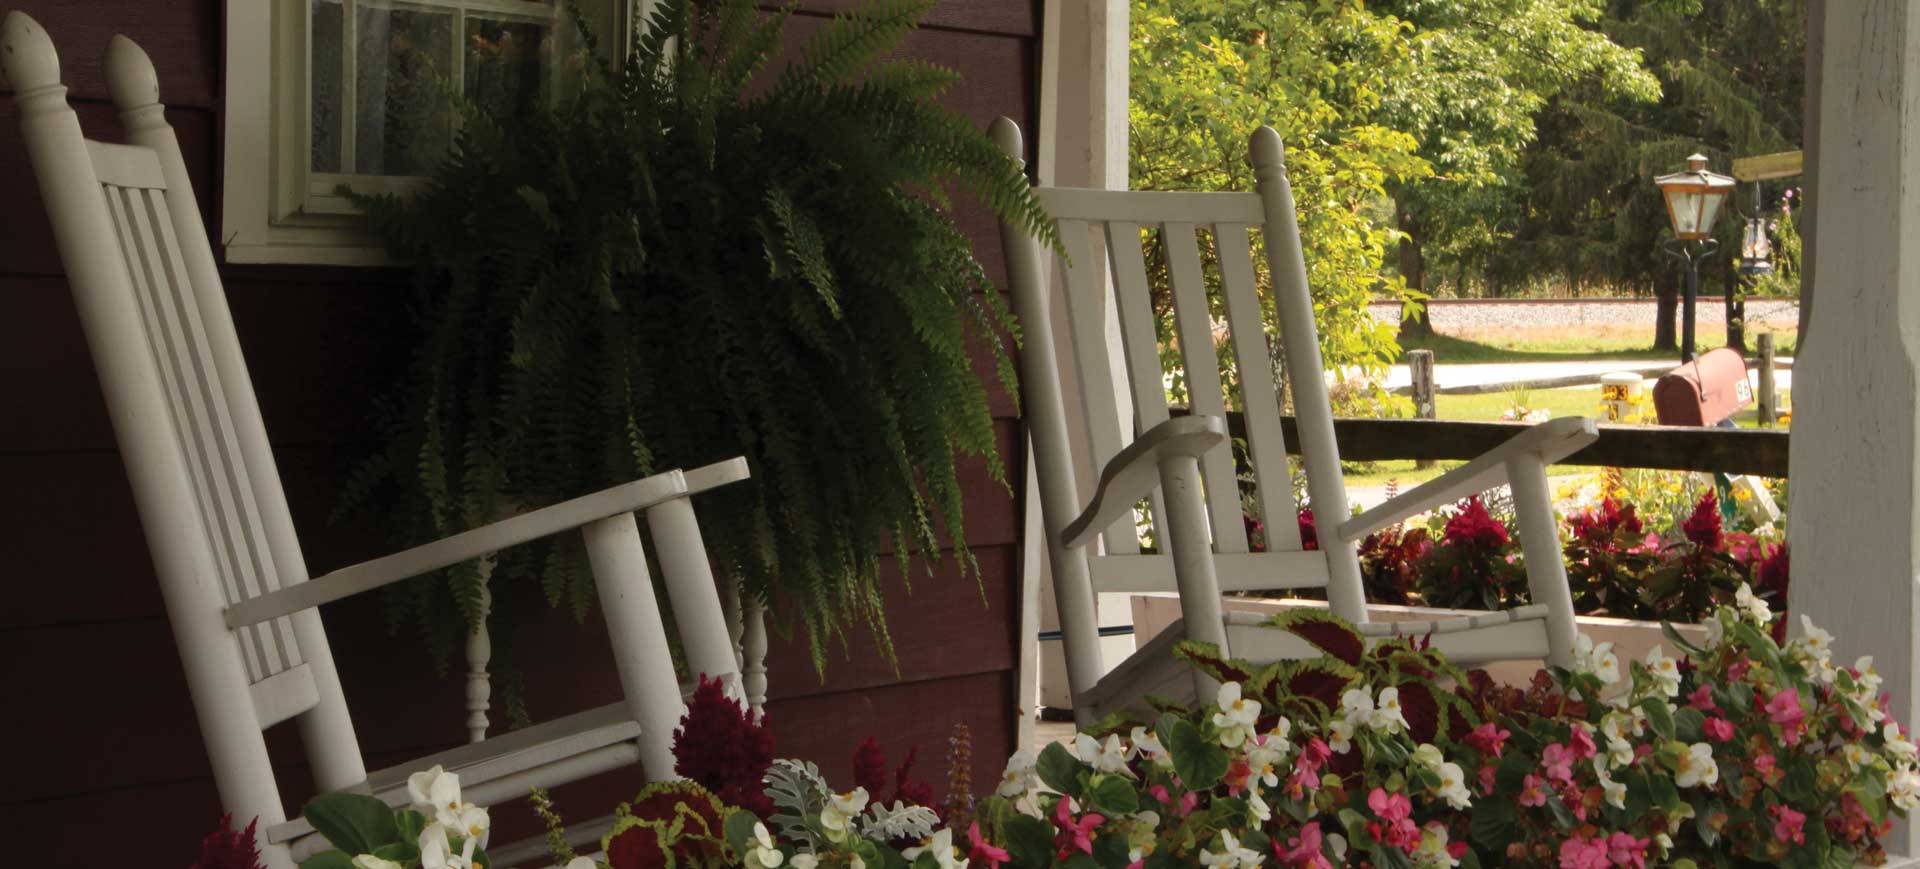 Rocking chairs on the porch at Hickory Bridge Farm Restaurant and Bed & Breakfast